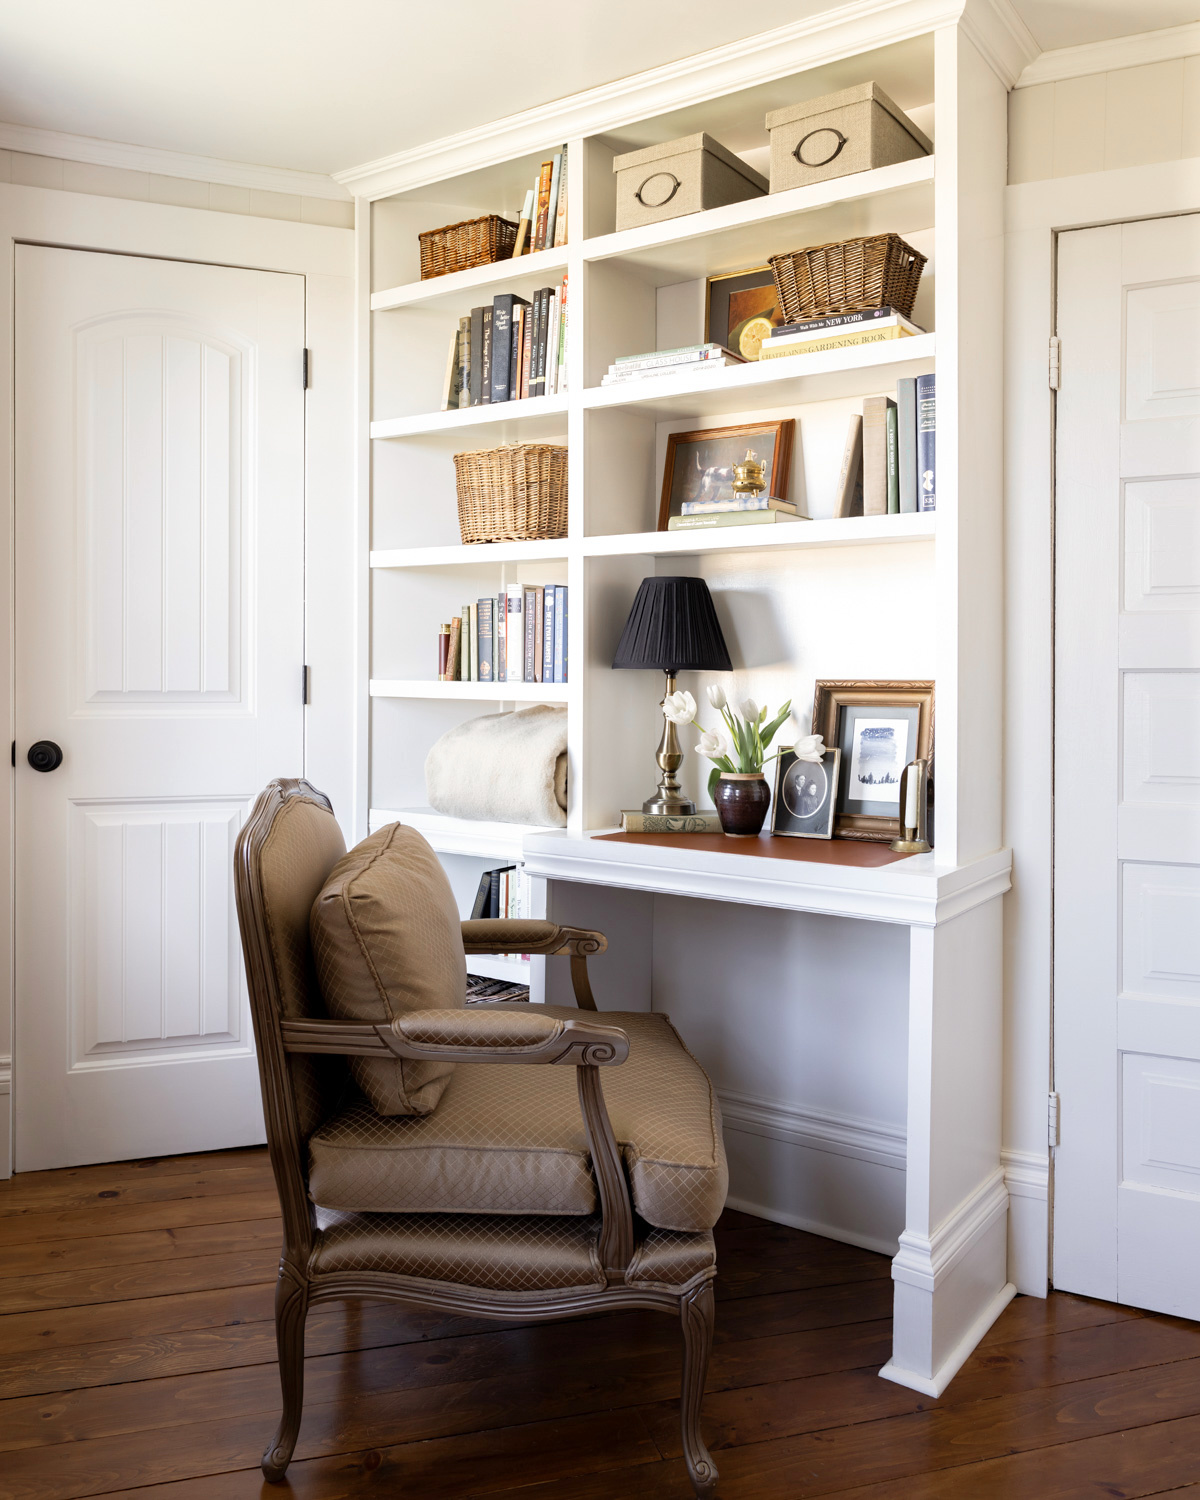 A white built-in bookshelf with a small desk area.